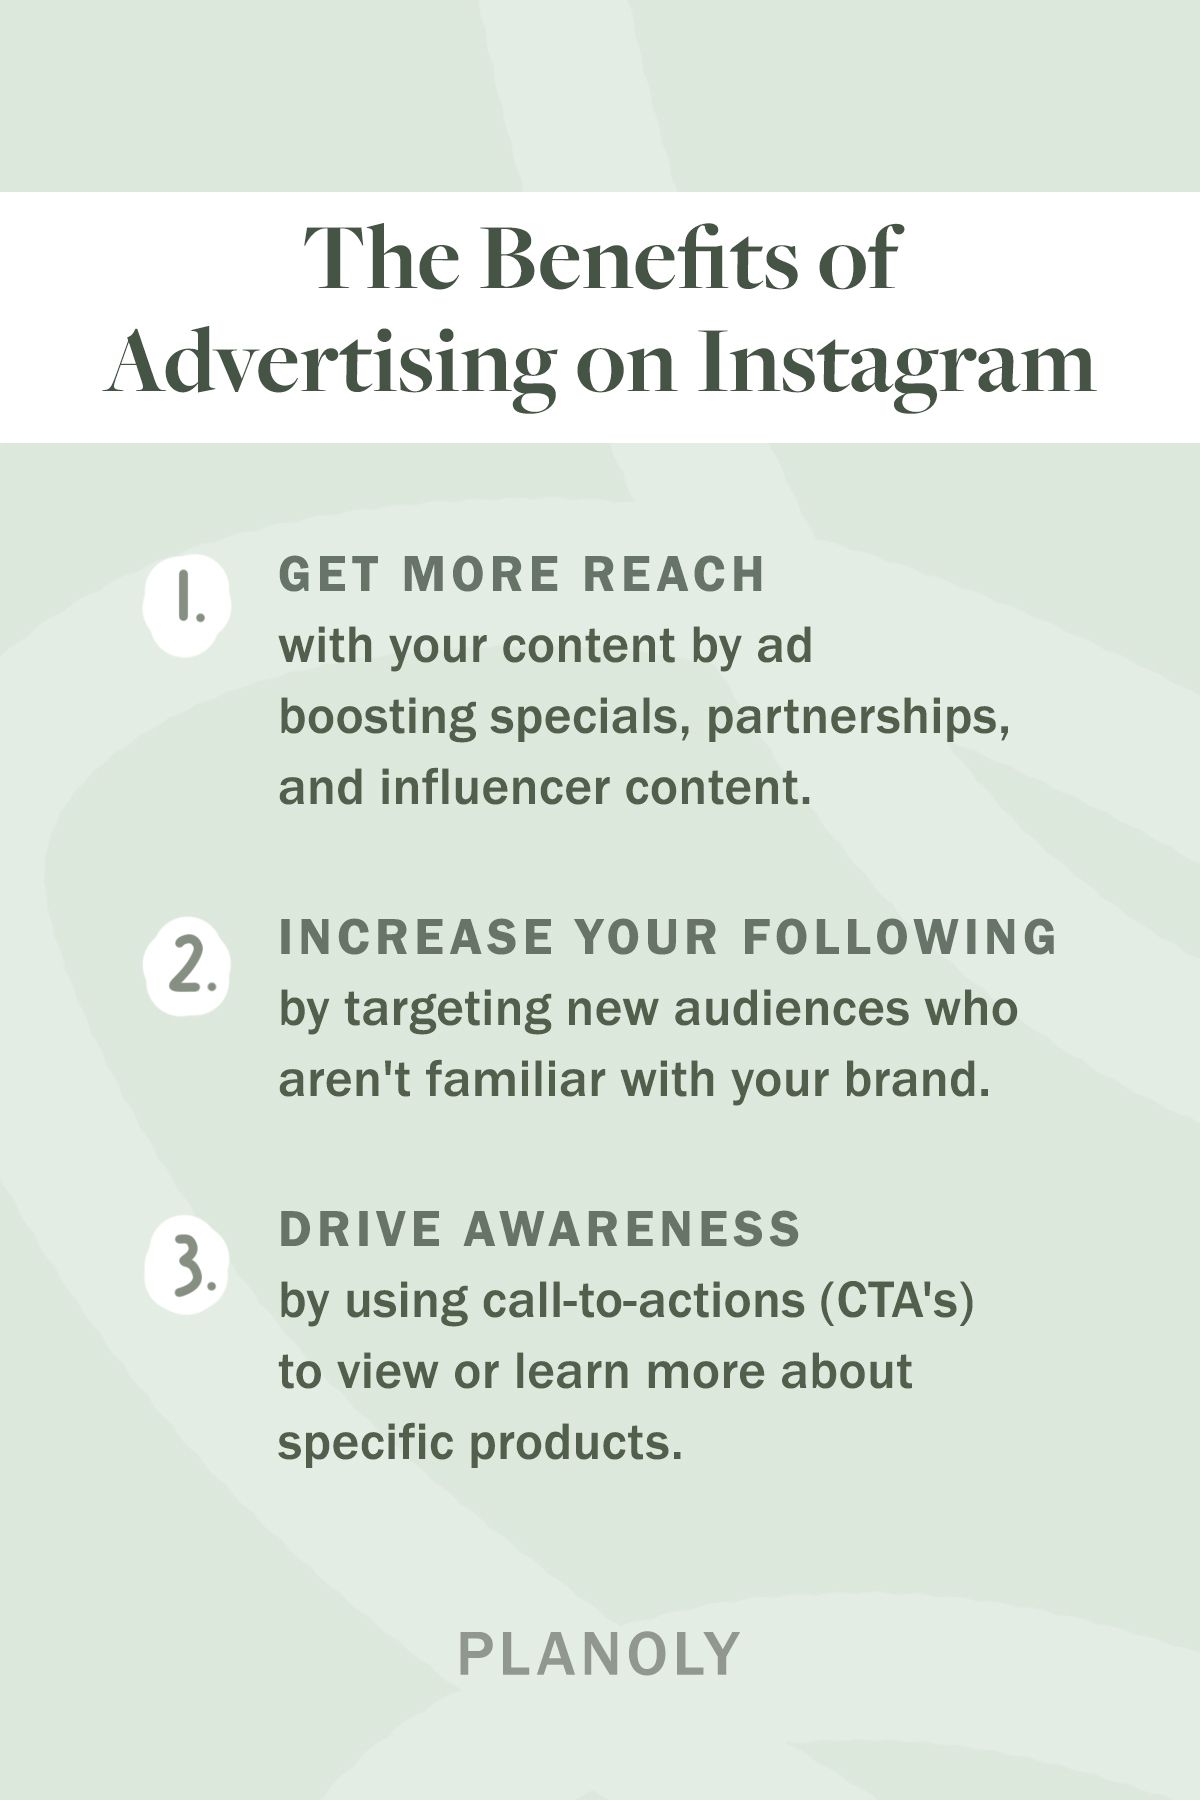 PLANOLY - Blog - How to Promote Your Business on Instagram - Vertical Image - 2